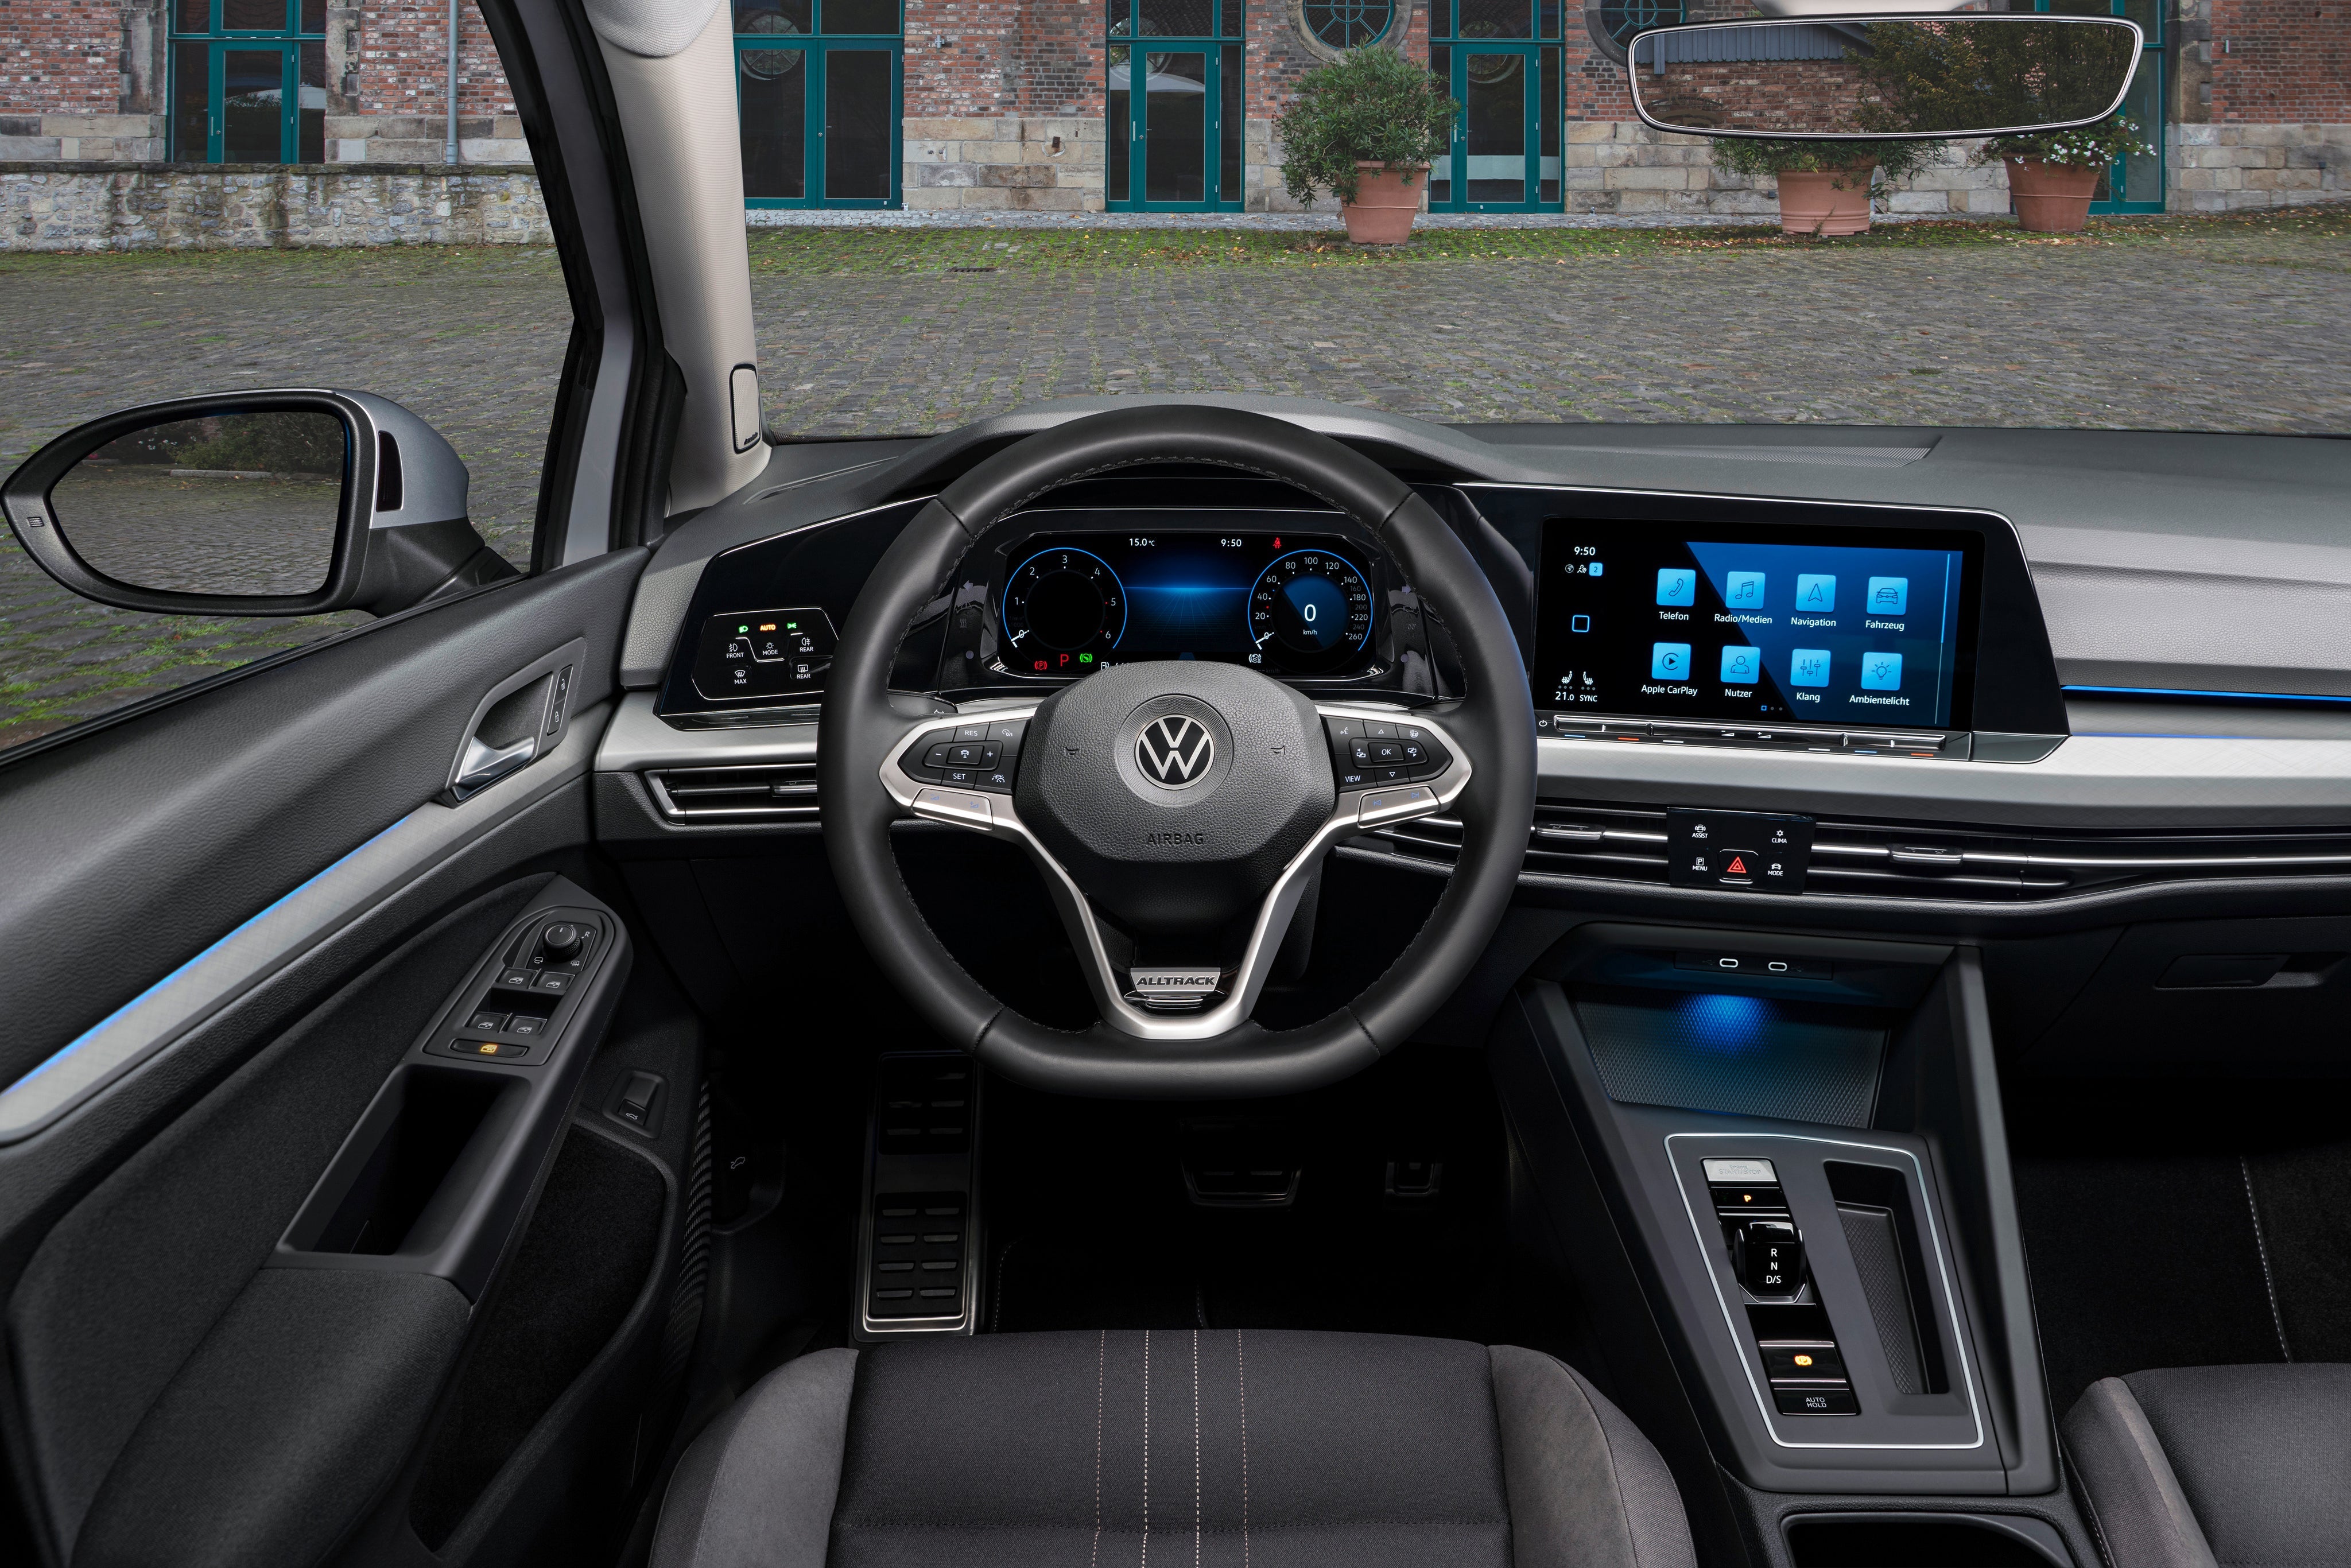 2020 VW Golf Interior: Forget The Renders, Here's The Real Deal | Carscoops